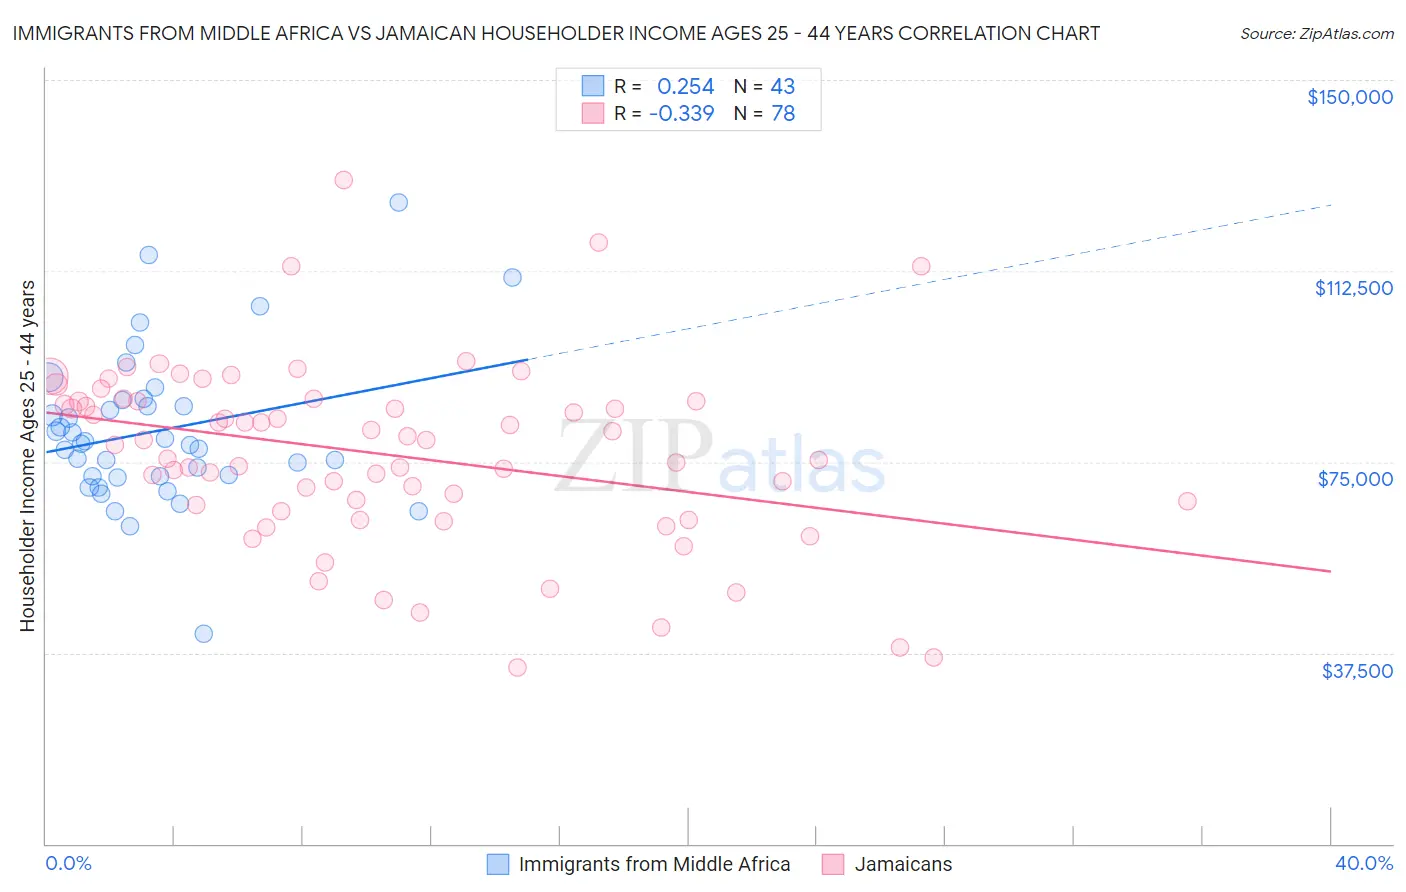 Immigrants from Middle Africa vs Jamaican Householder Income Ages 25 - 44 years